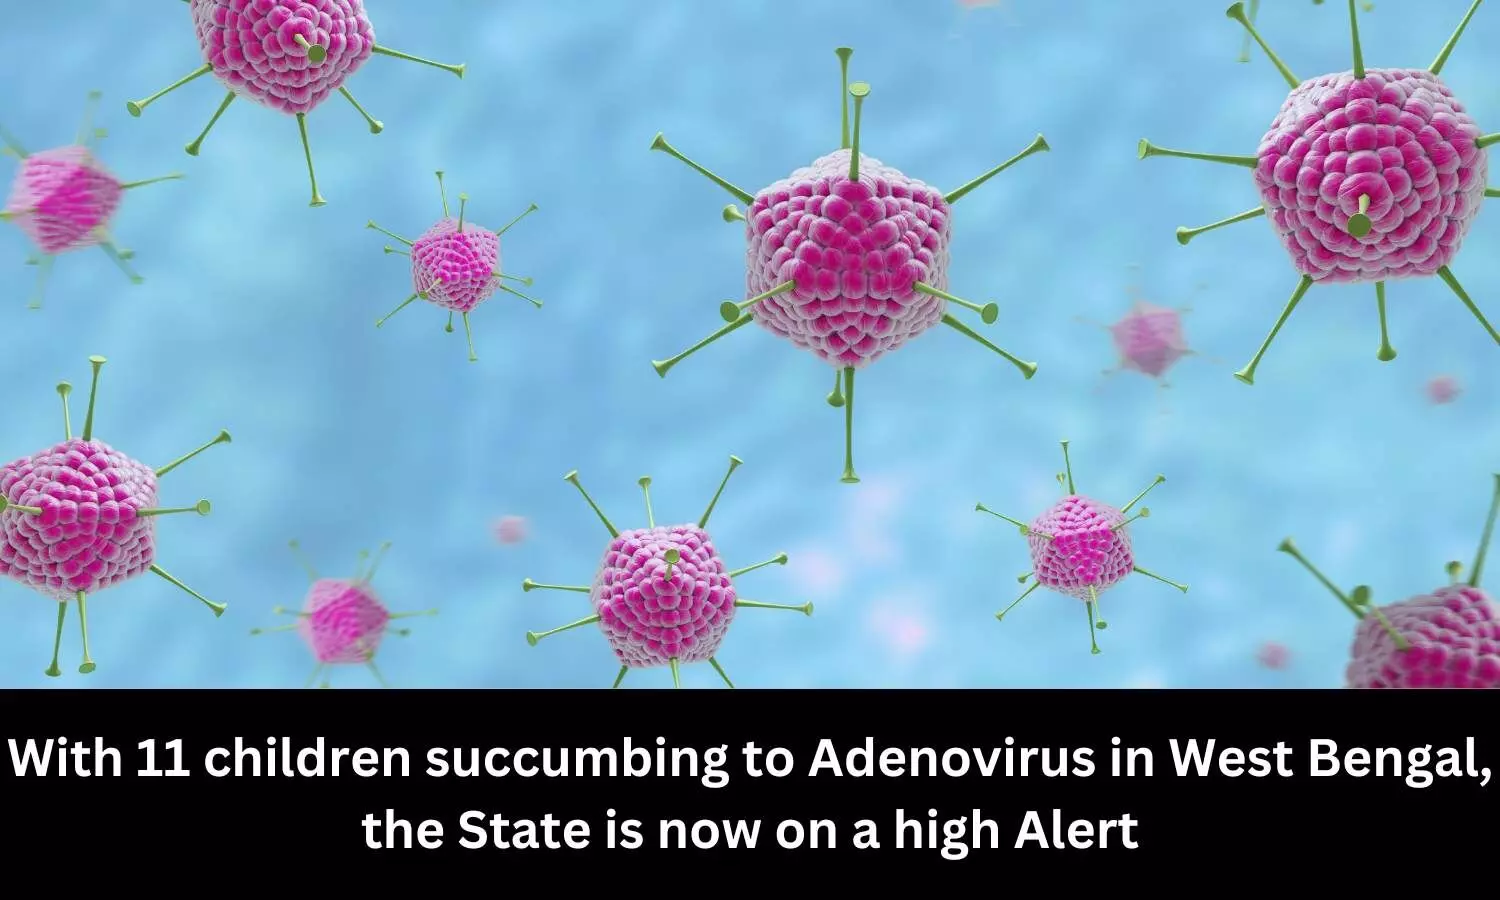 With 11 children succumbing to Adenovirus in West Bengal, the State is now on a high Alert